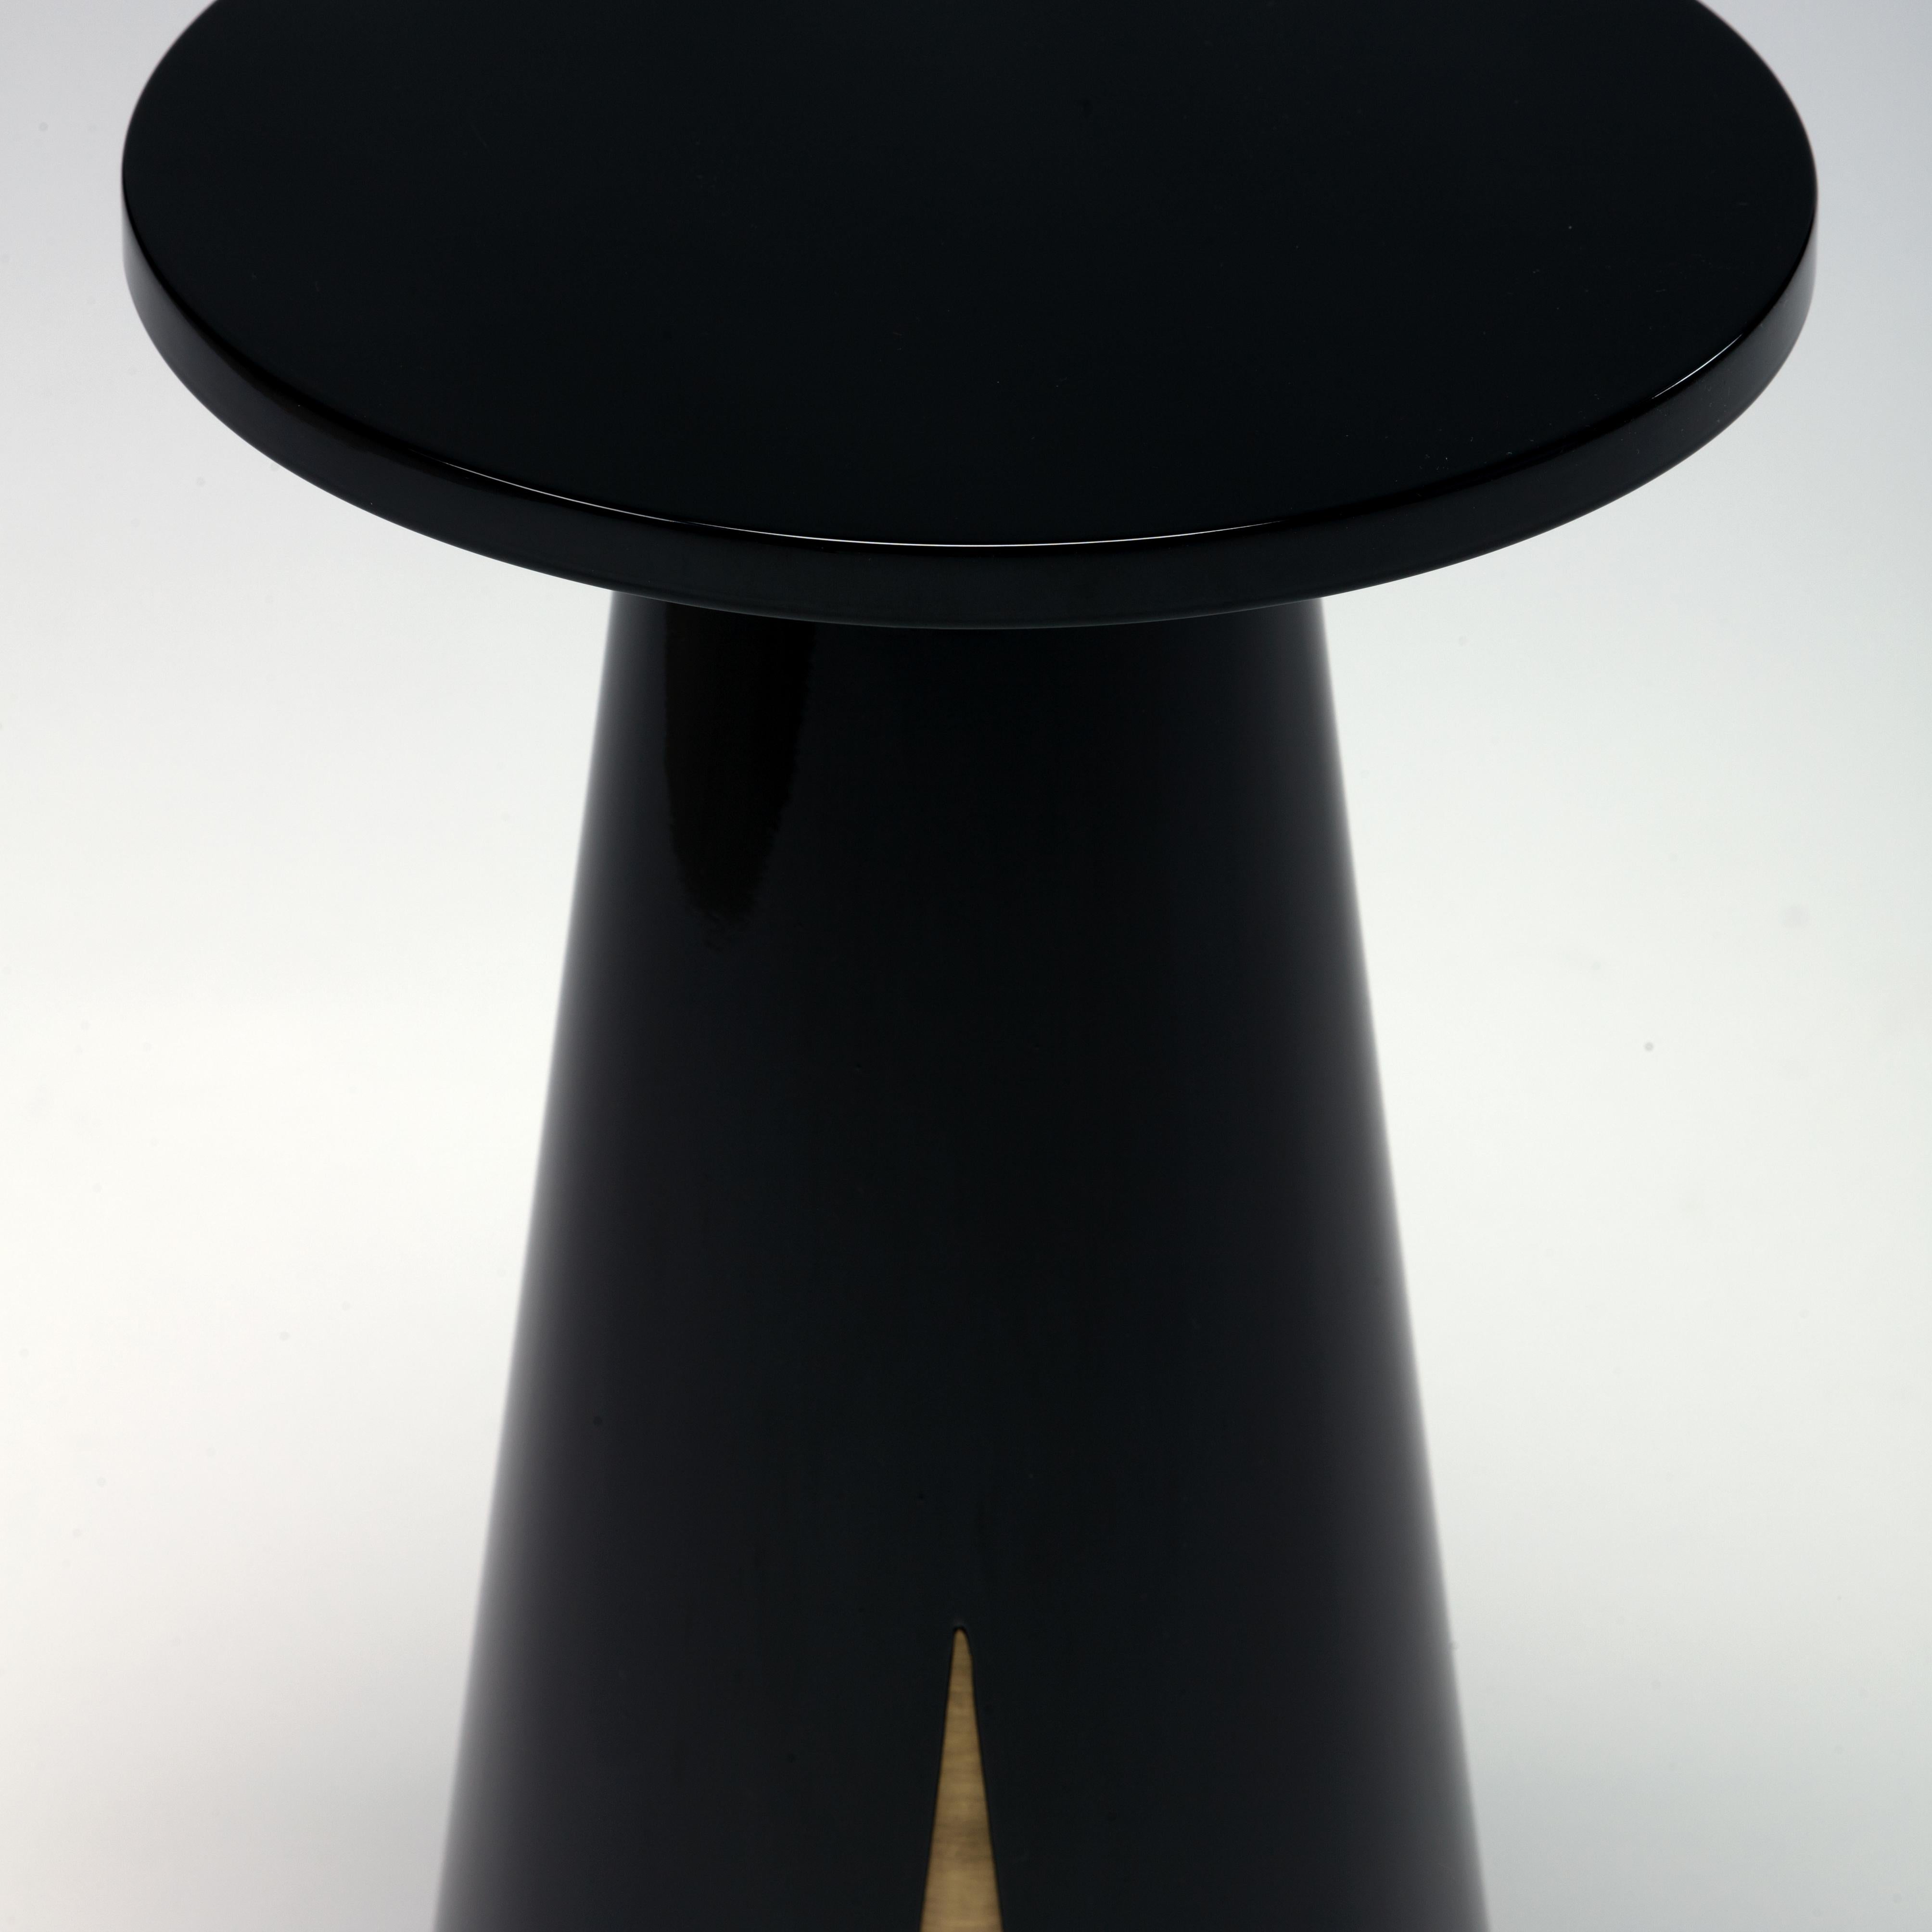 Modern Mini Moon Side Table, Black Lacquer and Light Bronze Details by Duistt